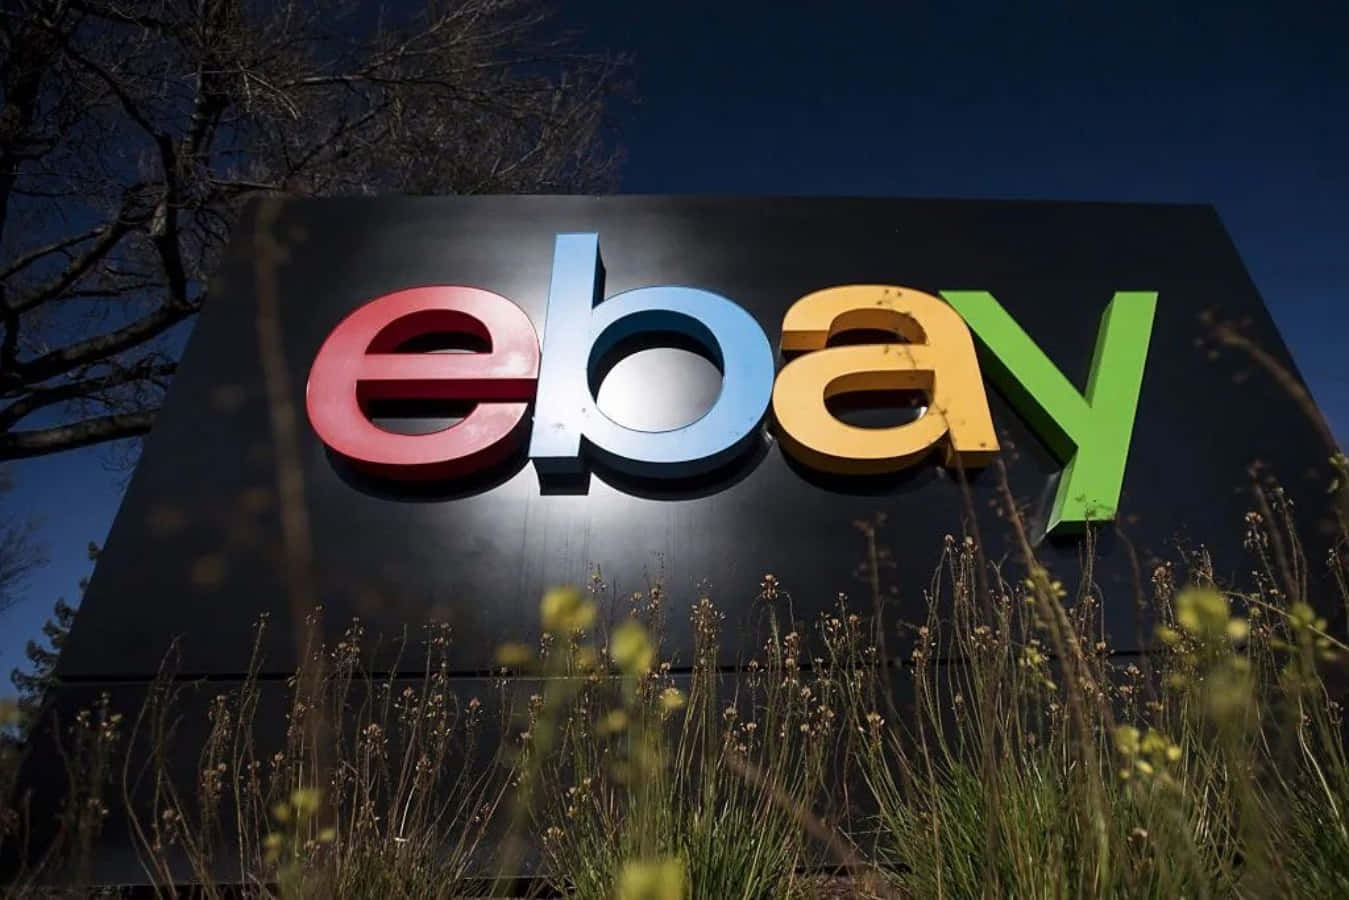 Ebay's Logo Is Seen In Front Of A Building